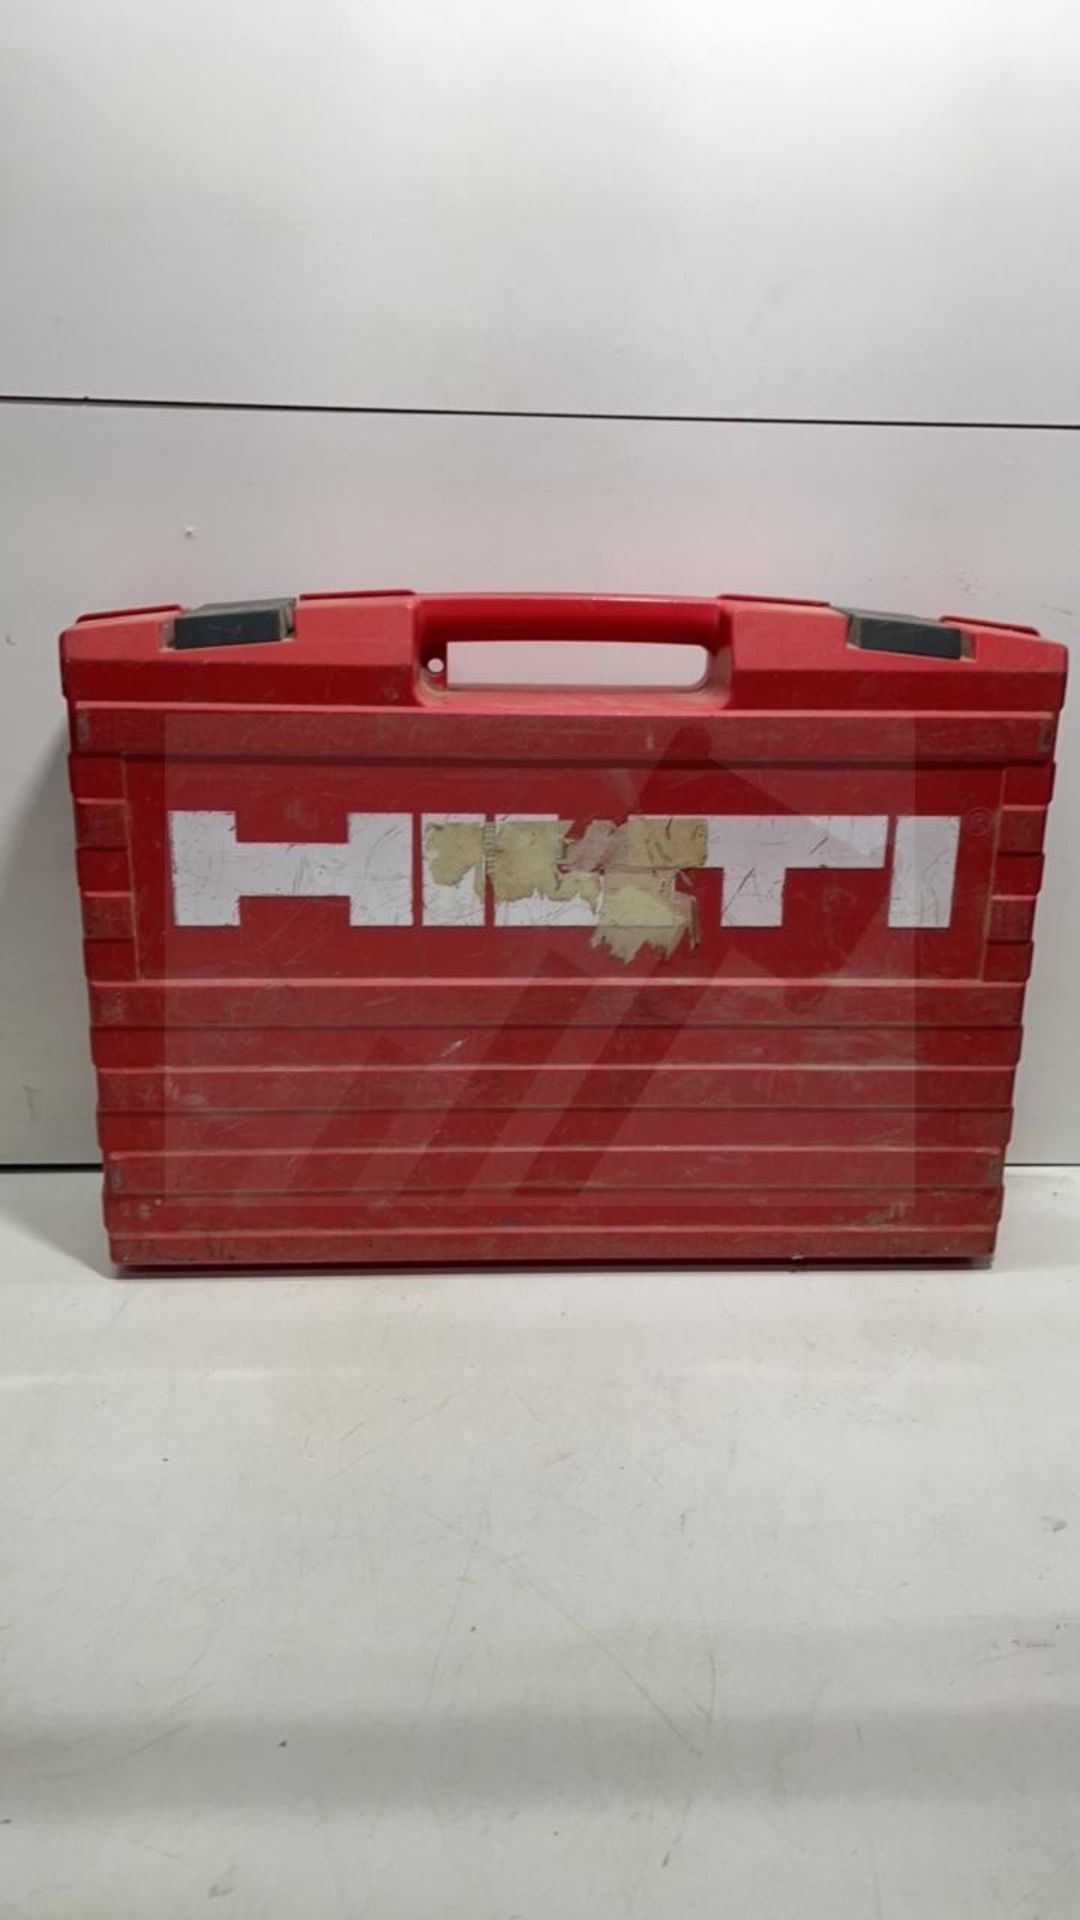 HILTI DX 351 POWER-ACTUATED TOOL - Image 5 of 5